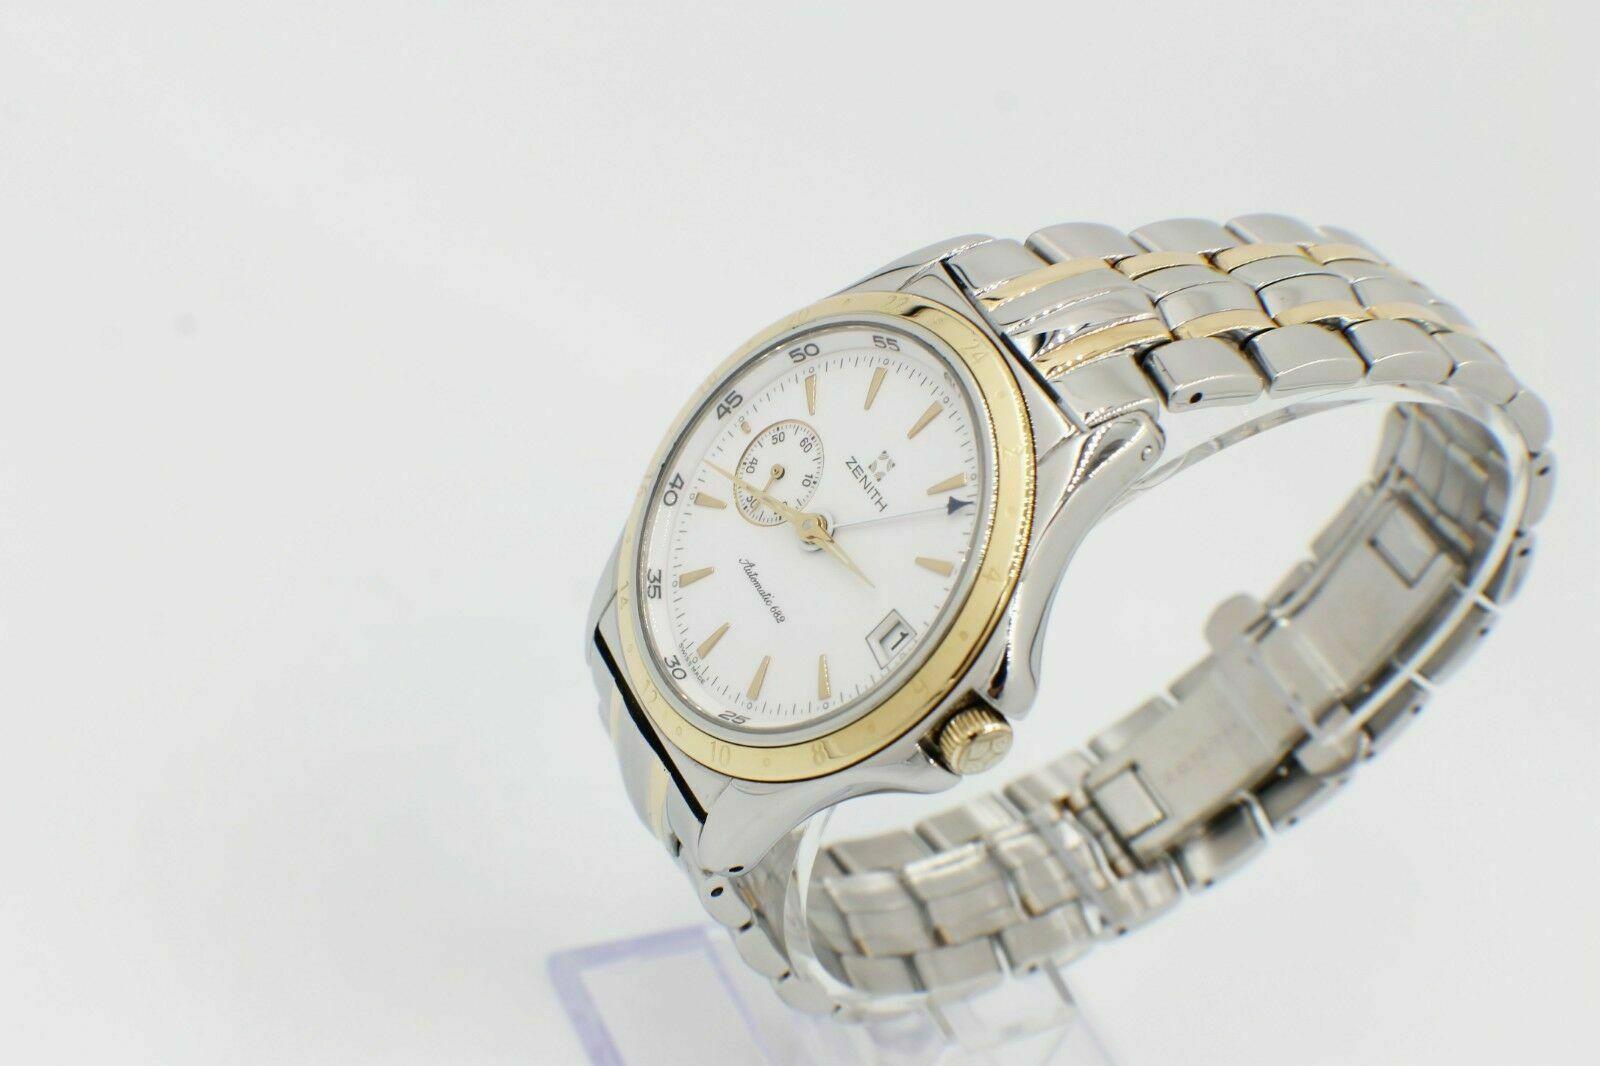 Reference Number: 53.0030.682

 

Year: 2000

 

Model: Elite 

 

Case Material: Stainless Steel 

 

Band: 18K Yellow Gold & Stainless Steel 

 

Bezel: 18K Yellow Gold

 

Dial: White

 

Face: Sapphire Crystal 

 

Case Size: 38mm

 

Includes: